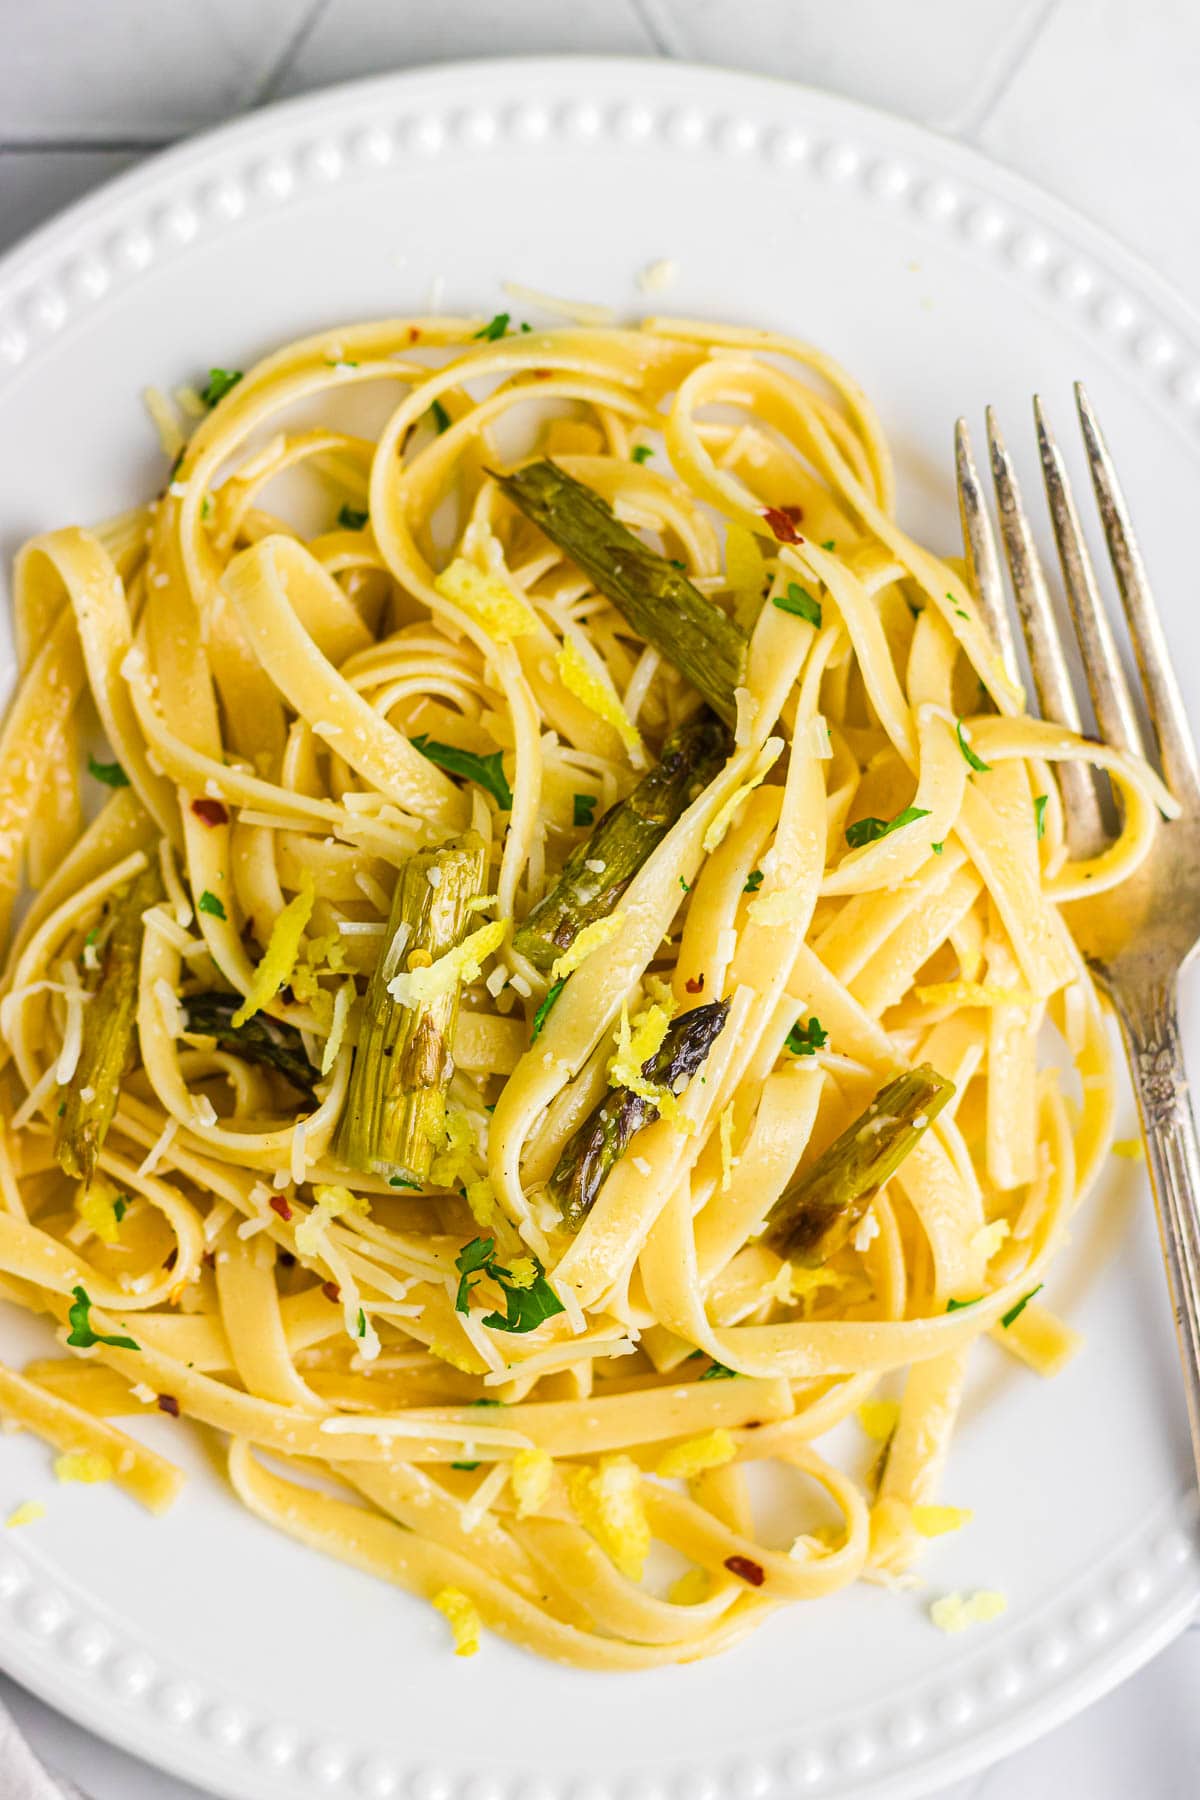 Pasta with asparagus, zest, and herbs on a white plate.